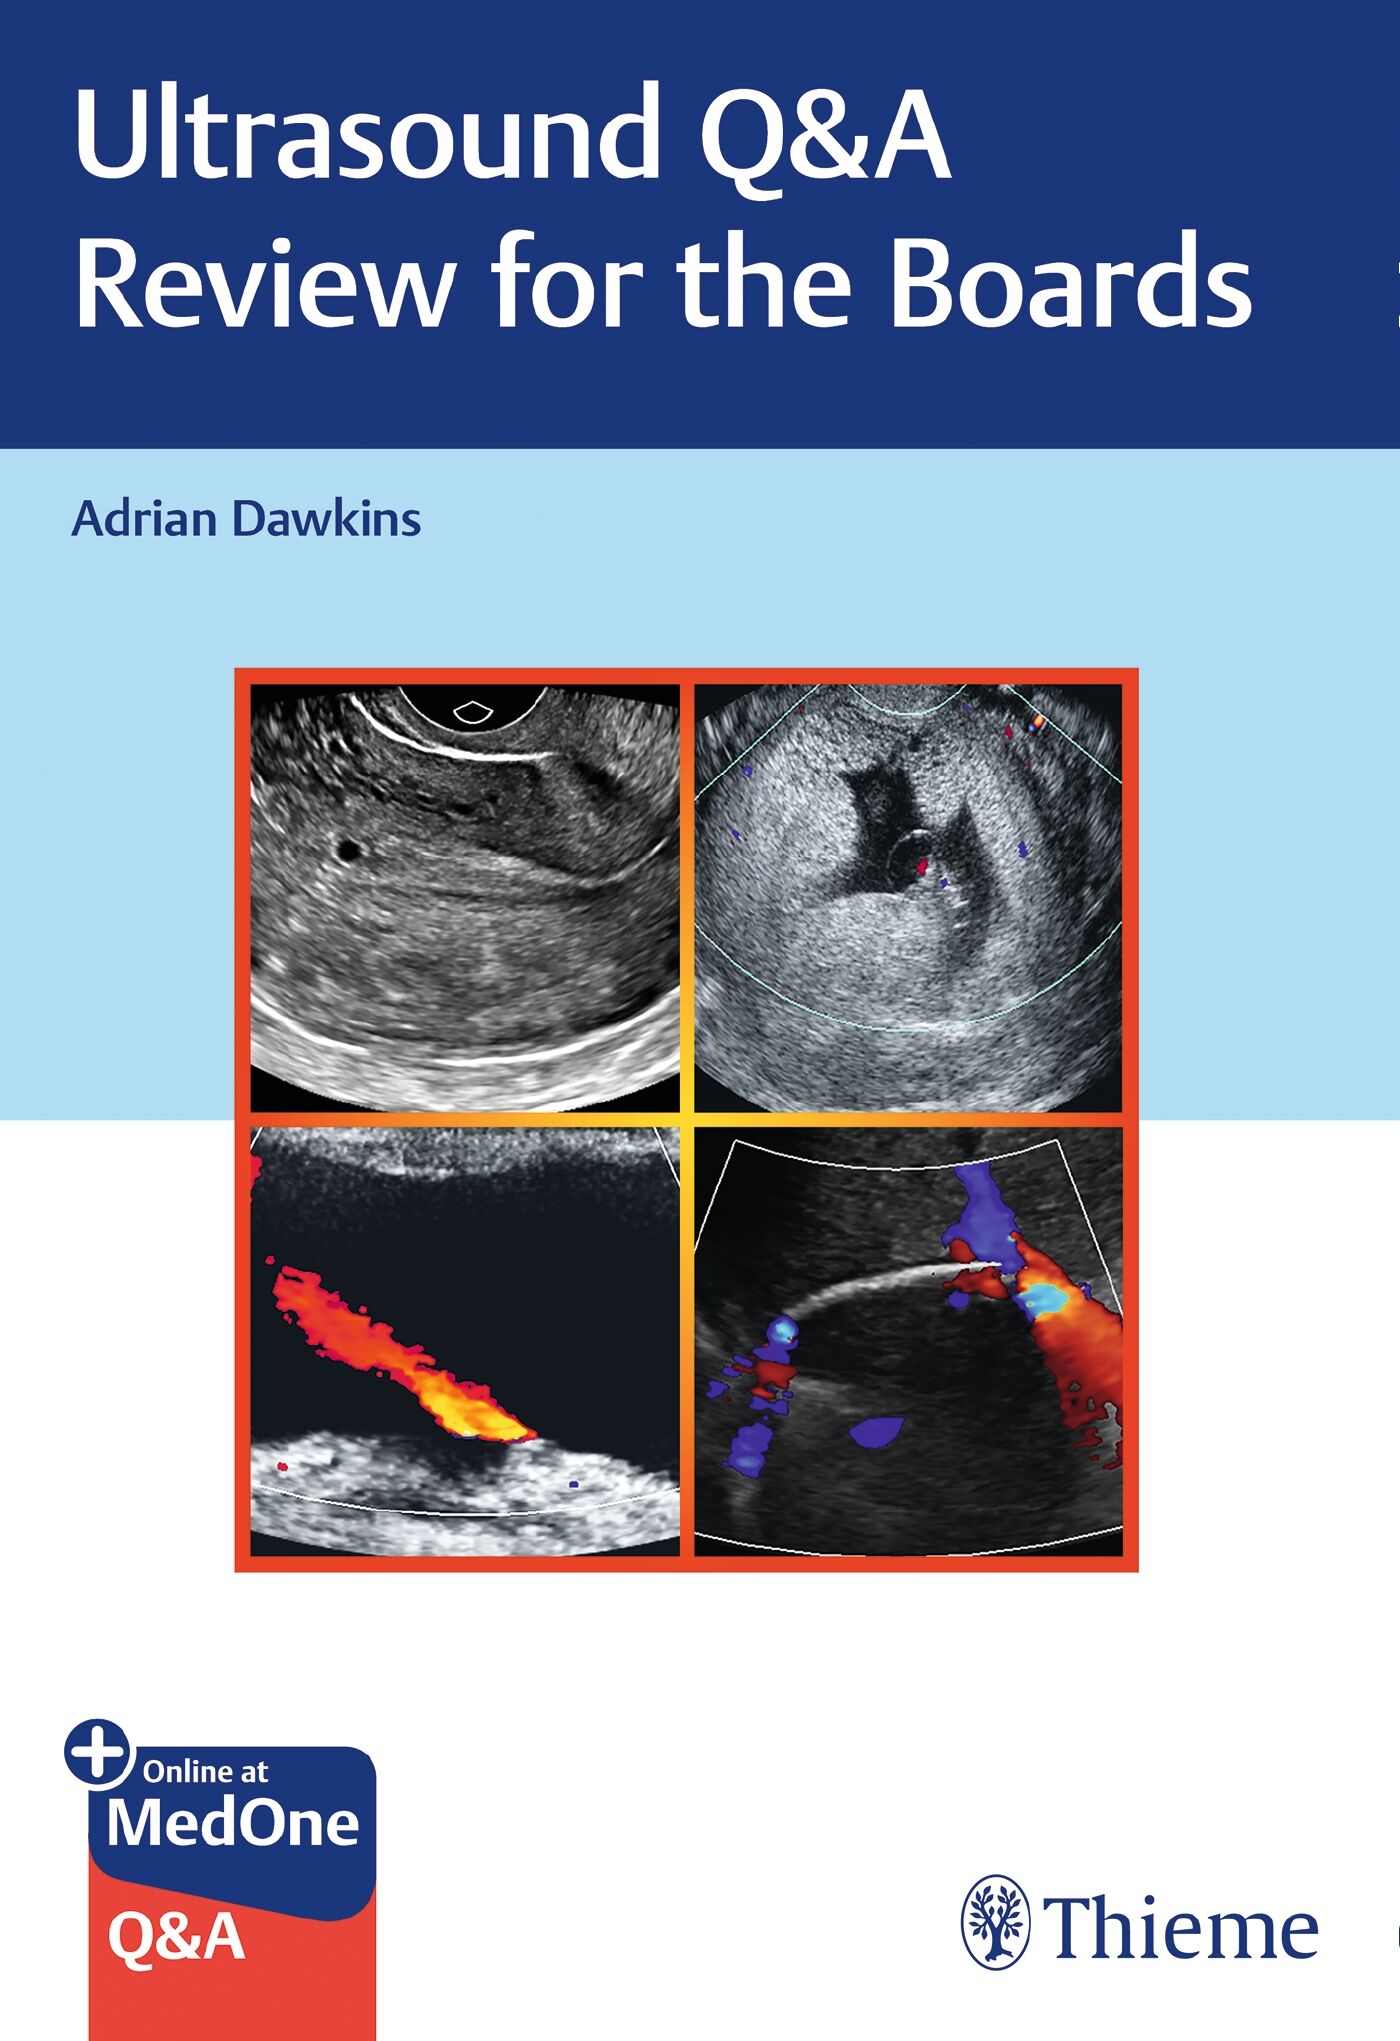 Ultrasound Q&A Review for the Boards, 9781626234864